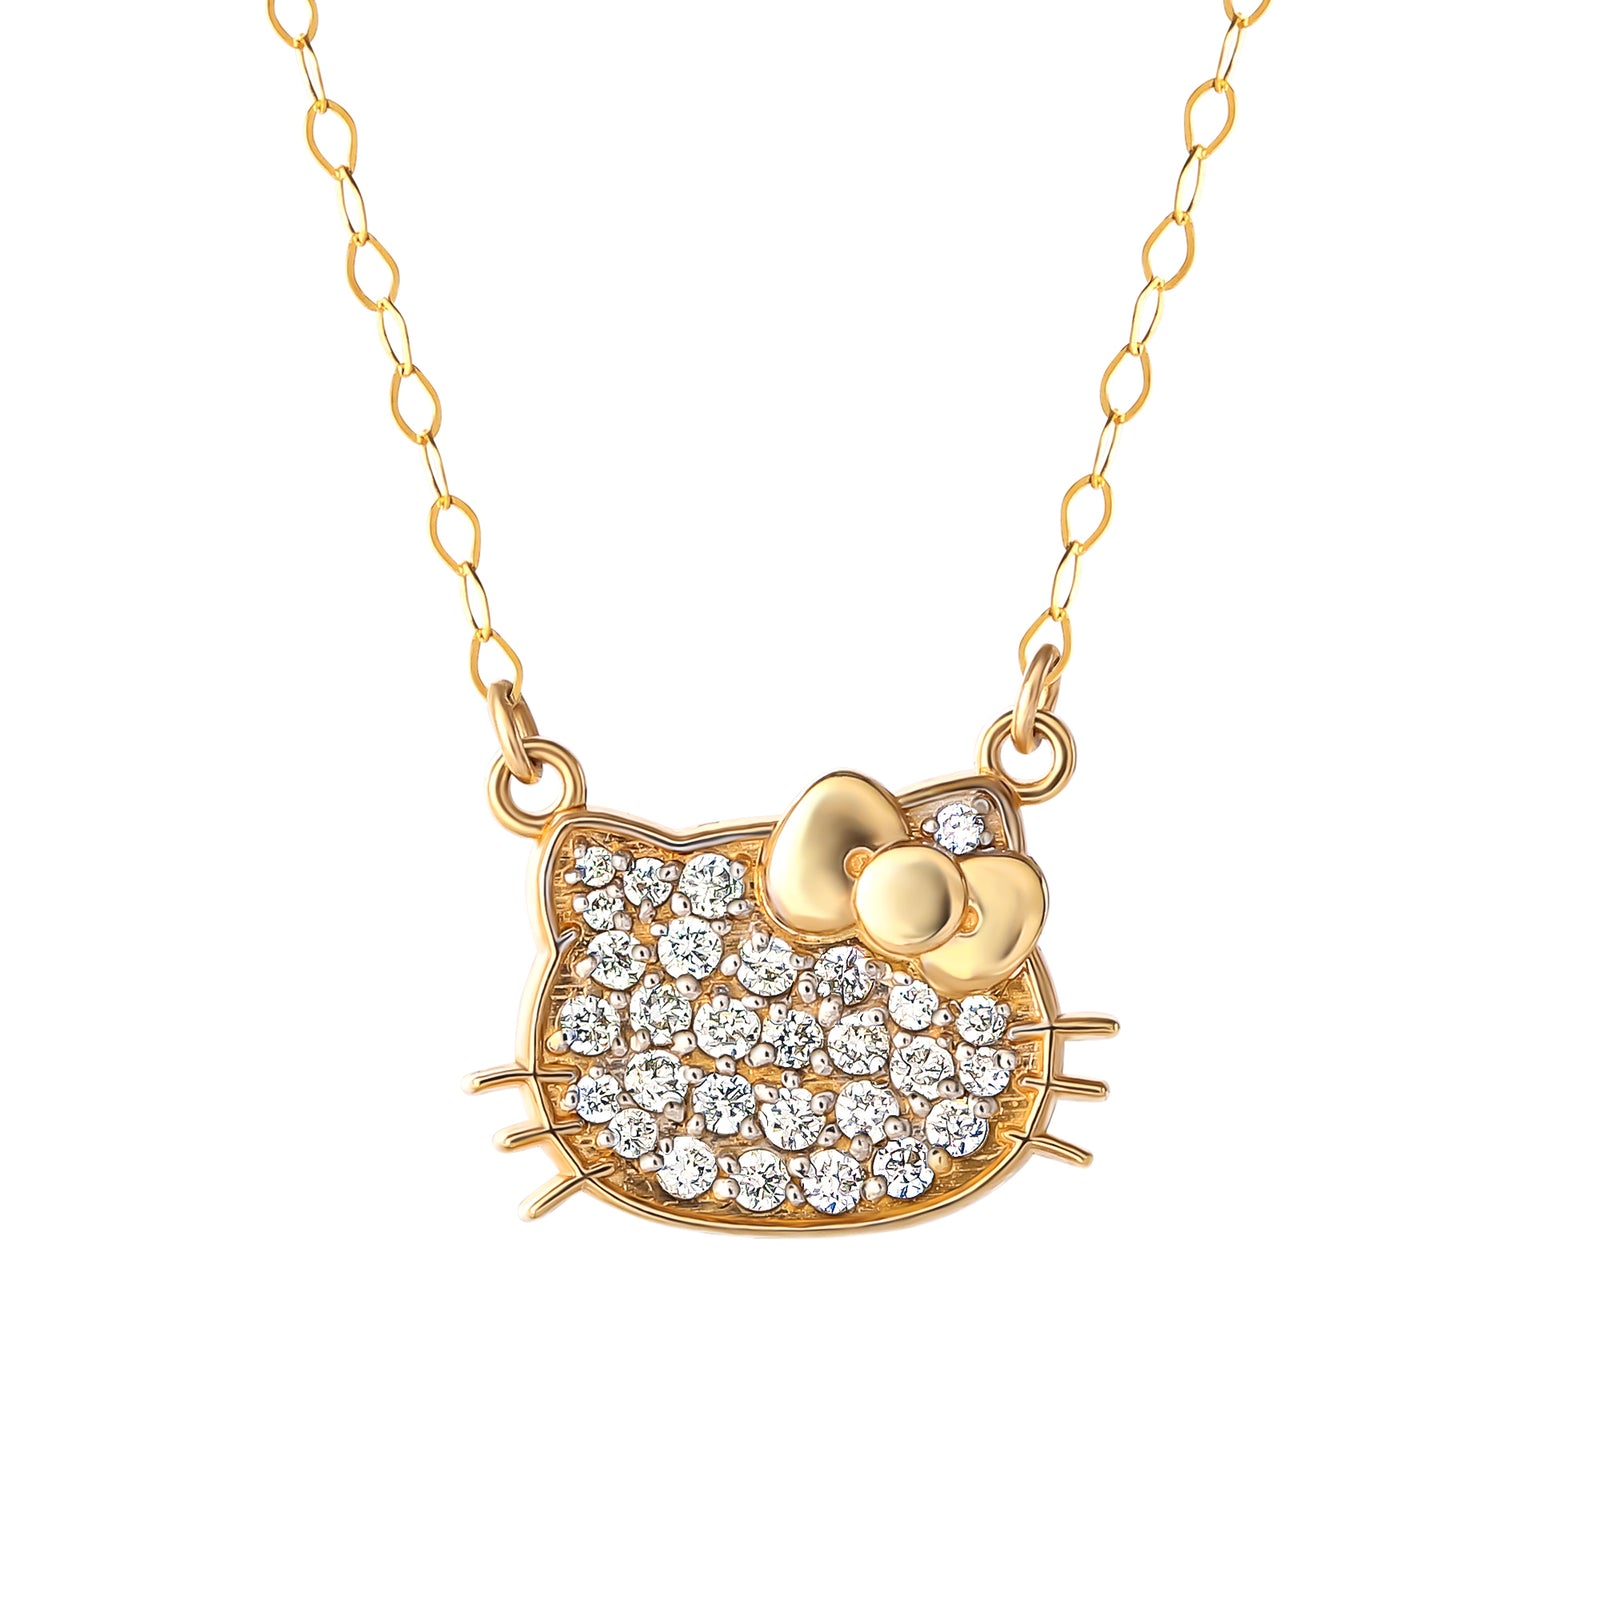 Crocs Chain Charm With Lovely Bling Gold Heart Chains for Suitable Crocs. -   Canada